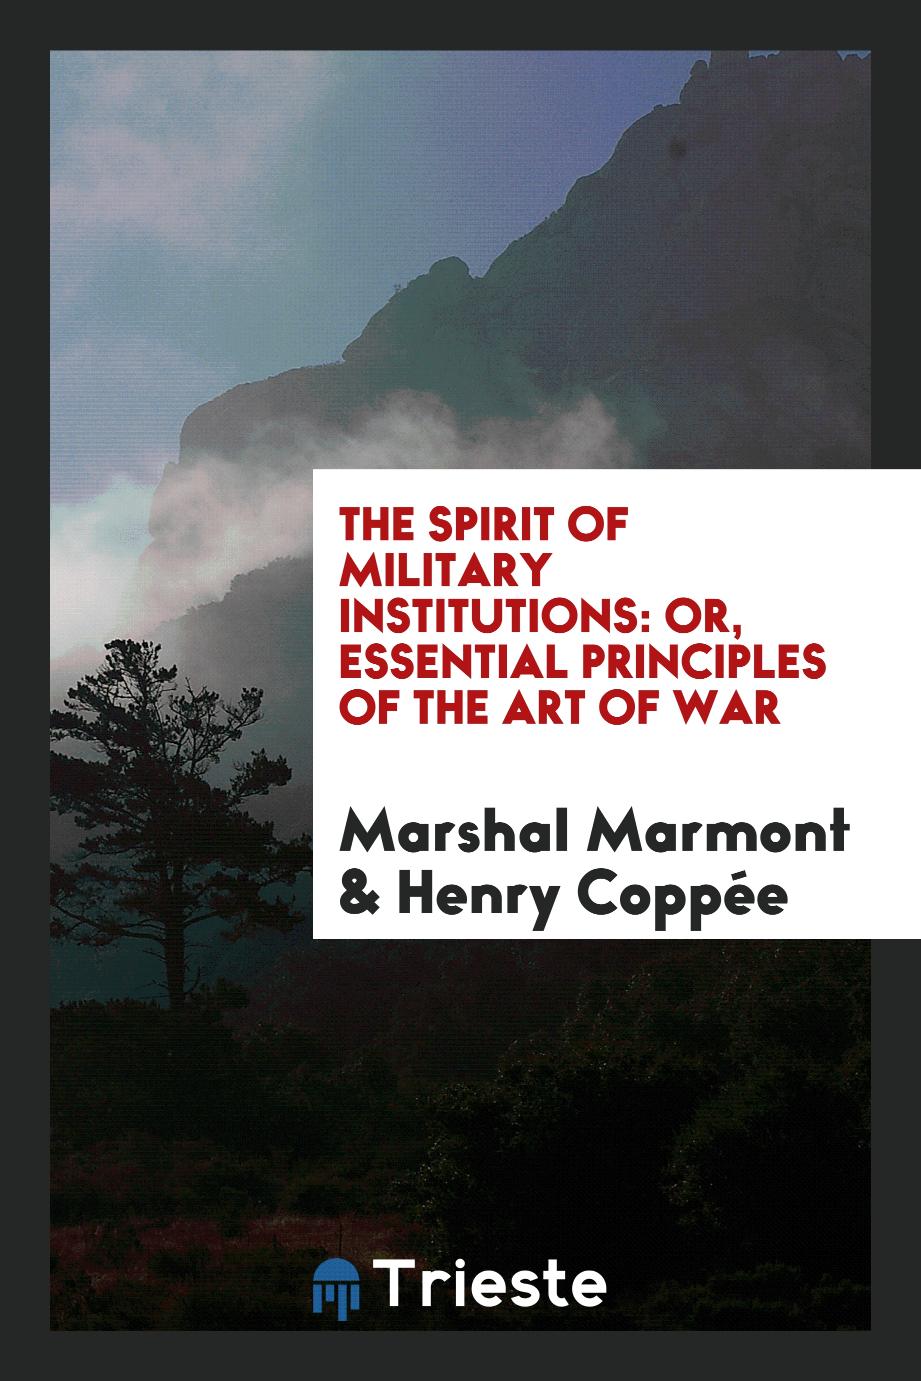 The spirit of military institutions: or, Essential principles of the art of war